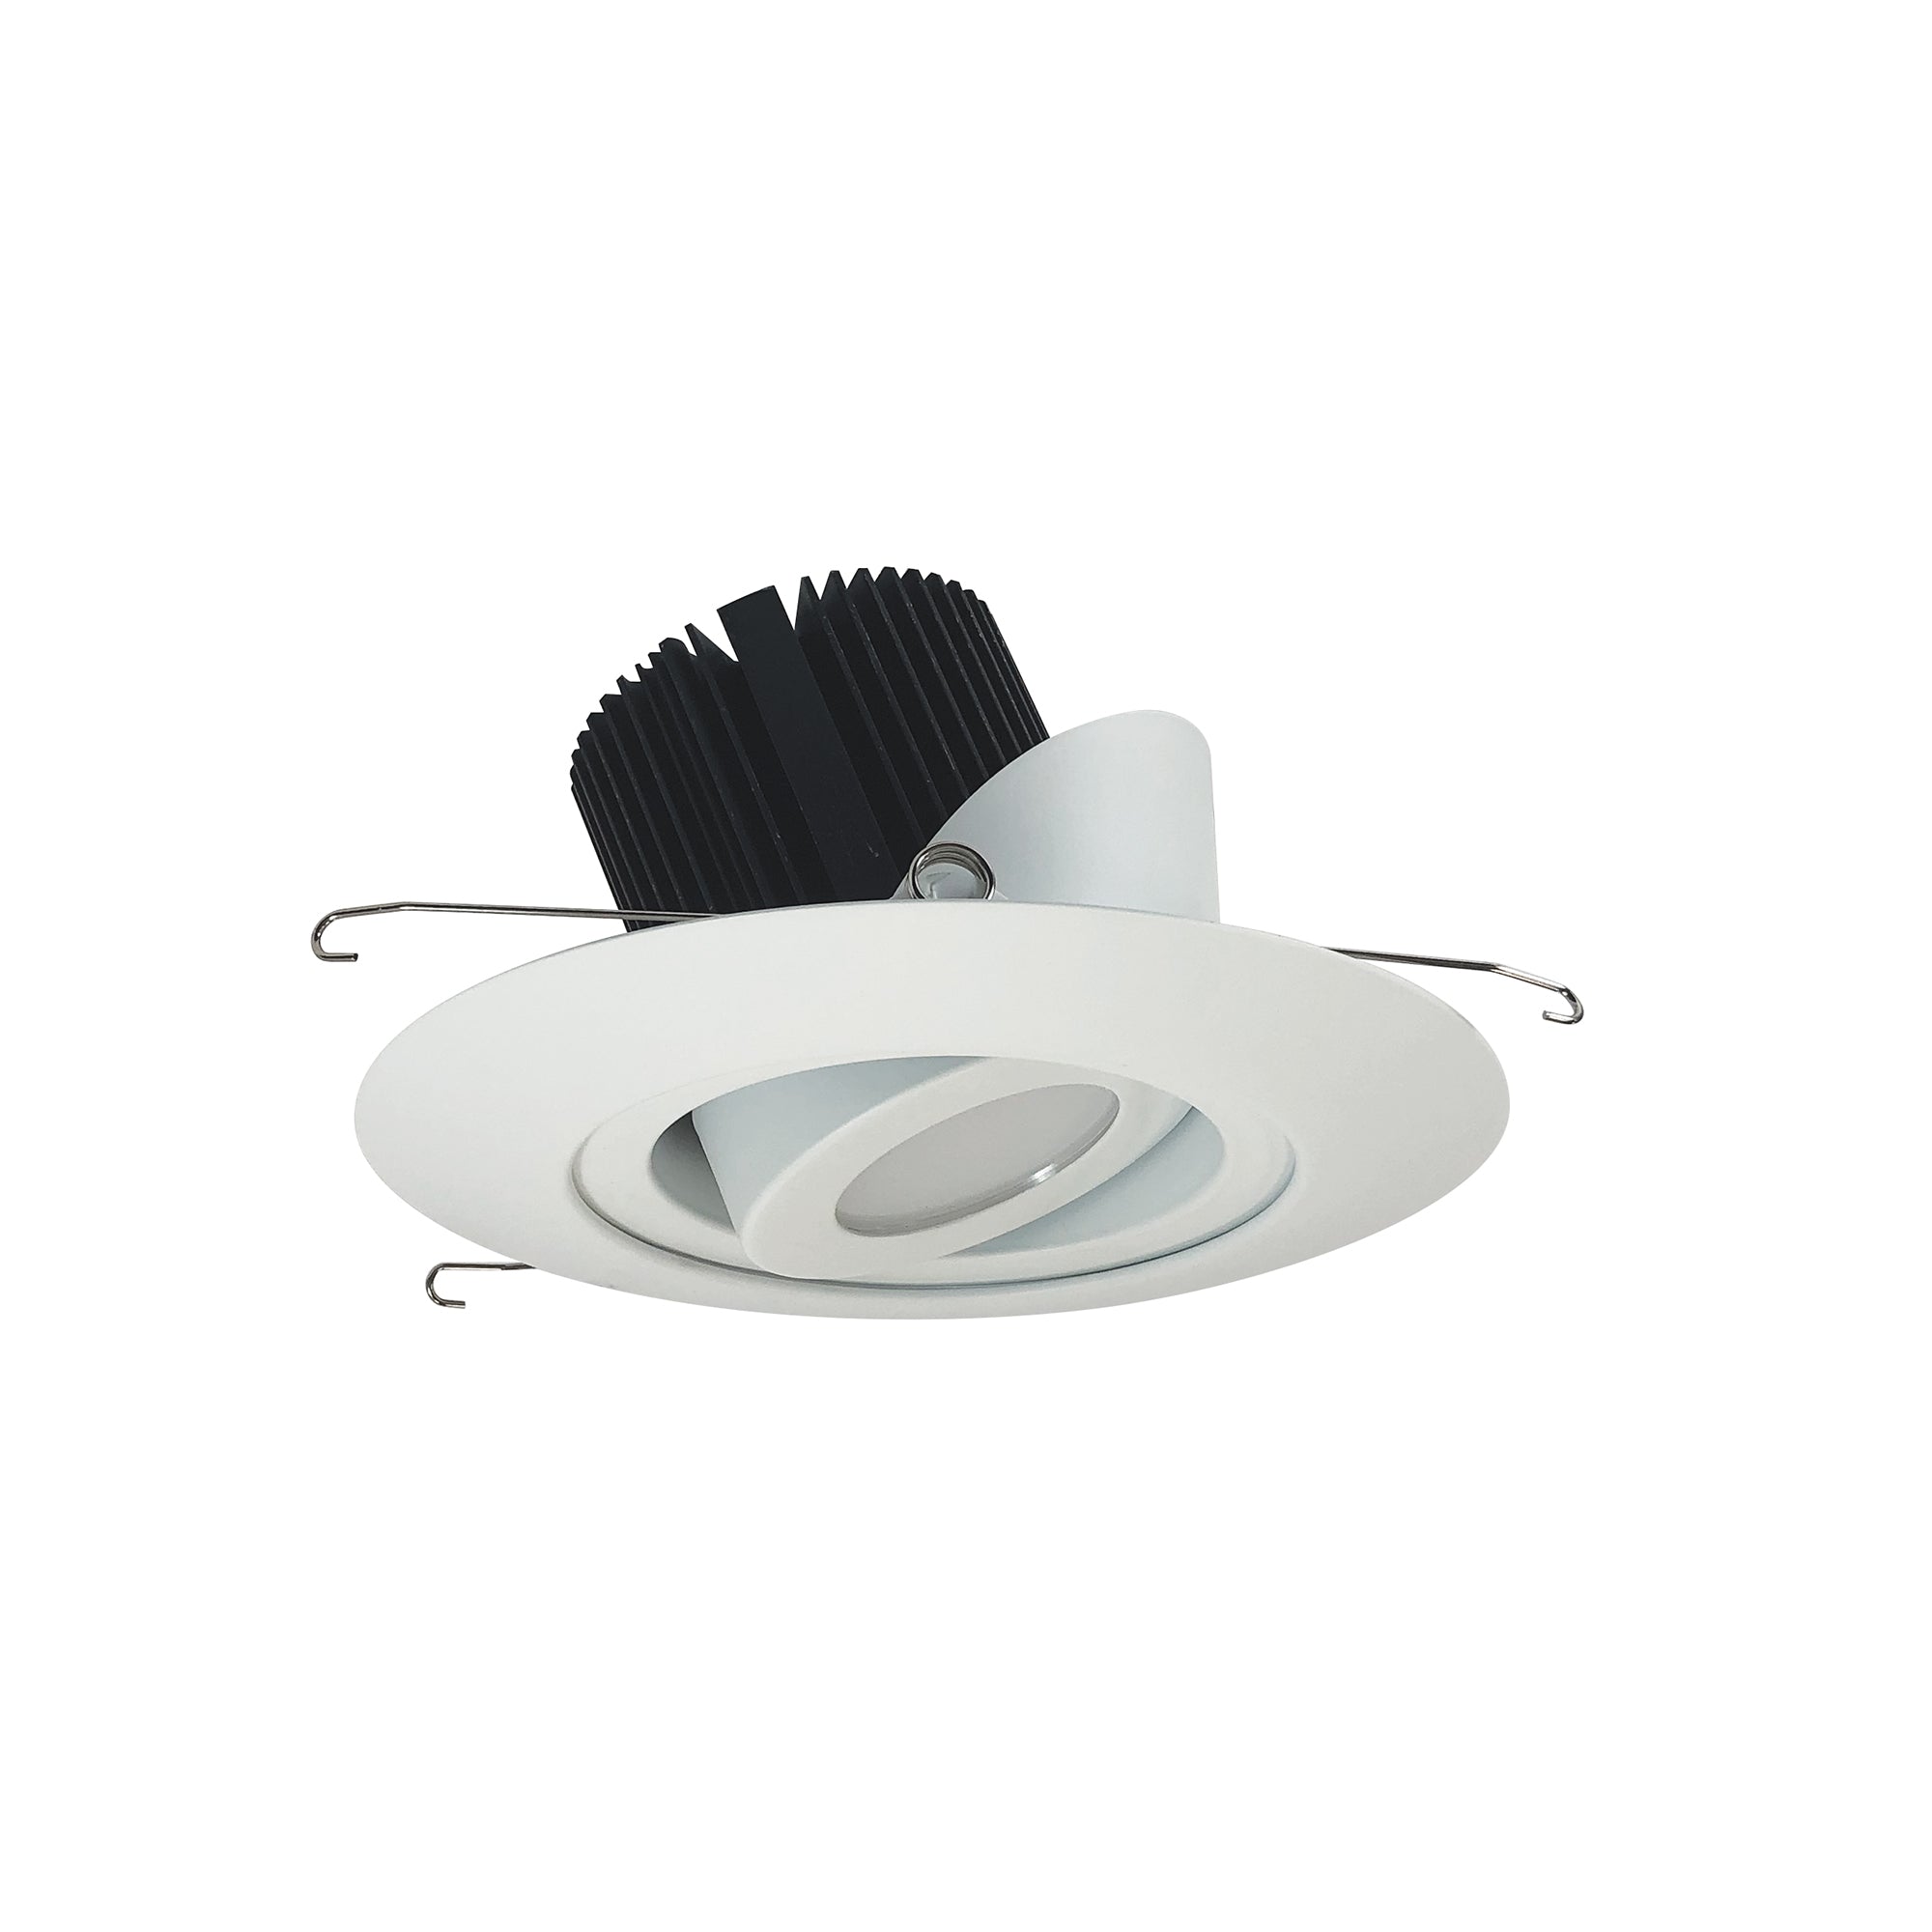 Nora Lighting NRM2-614L2530FMPW - Recessed - 6 Inch Marquise II Round Surface Adjustable Trim, Flood, 2500lm, 3000K, Matte Powder White (Not Compatible with NHRM2-625 Housings)